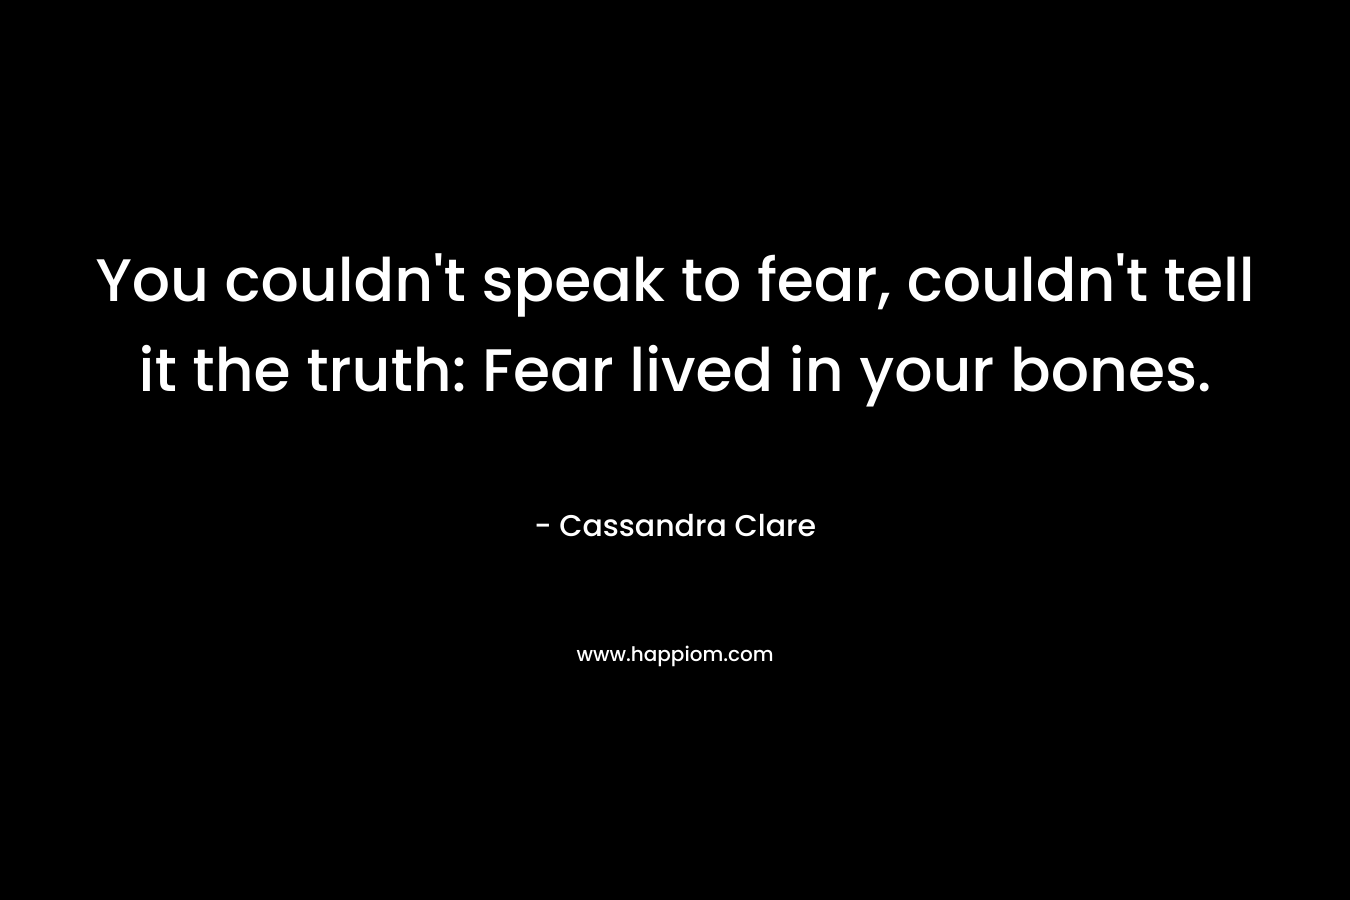 You couldn't speak to fear, couldn't tell it the truth: Fear lived in your bones.